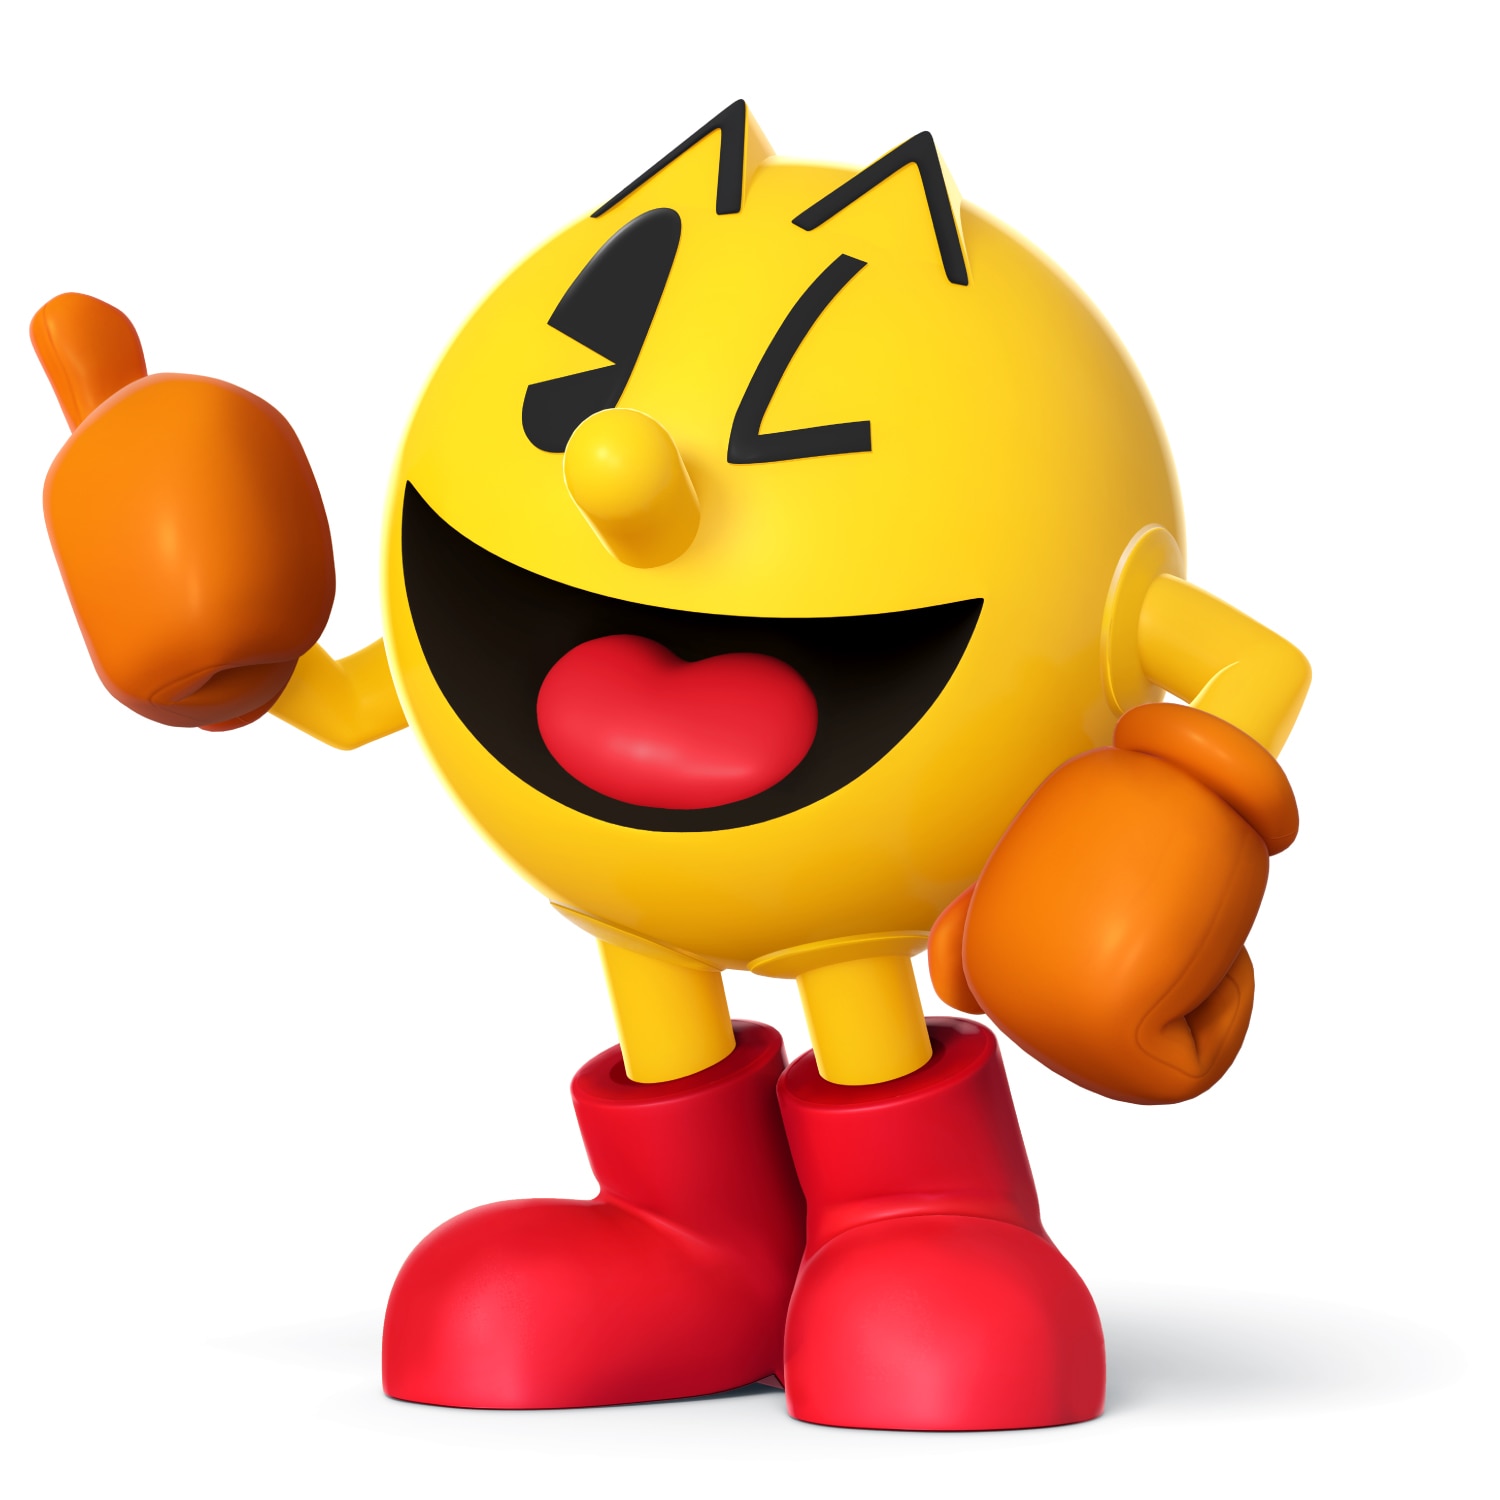 pacman for wii